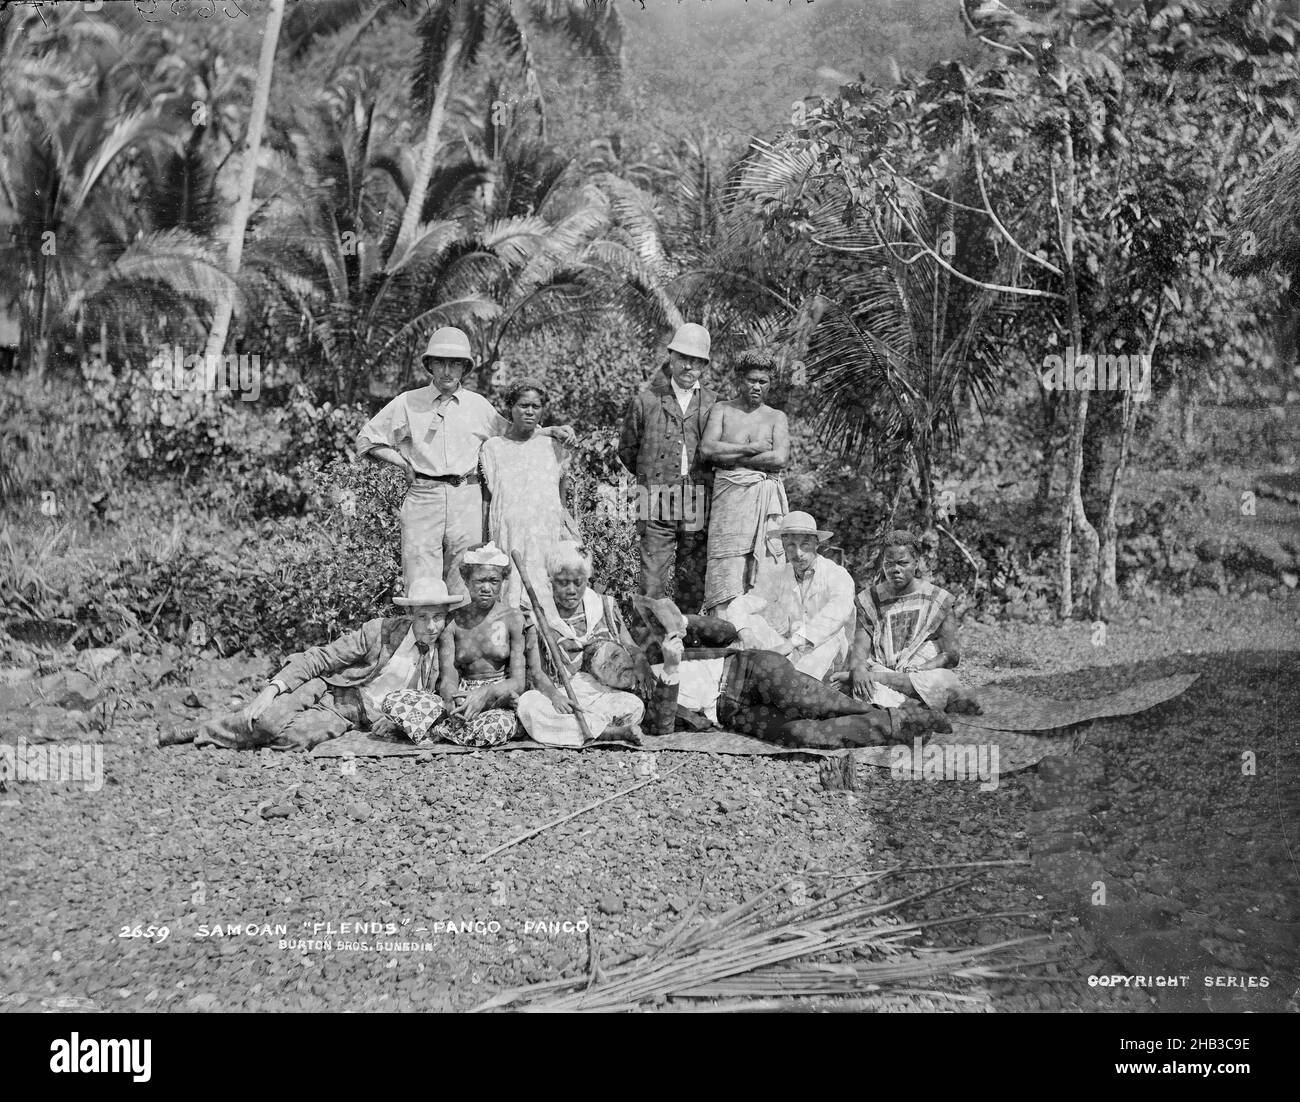 Samoan Flends, Pango Pango (sic), Burton Brothers studio, photography studio, 1884, Dunedin, gelatin dry plate process, Informal outdoor group portrait of male passengers from the Wairarapa paired up with local Samoan women. 'Flends' was the name given to Islanders who paired themselves off with a visitor and acted as a guide and performed tasks for a small fee. Included in the photograph is Faaolatana (front row, second from right) and the Englishman Mr W T Still (front row, first from right), with his head in Faaolatana's lap Stock Photo